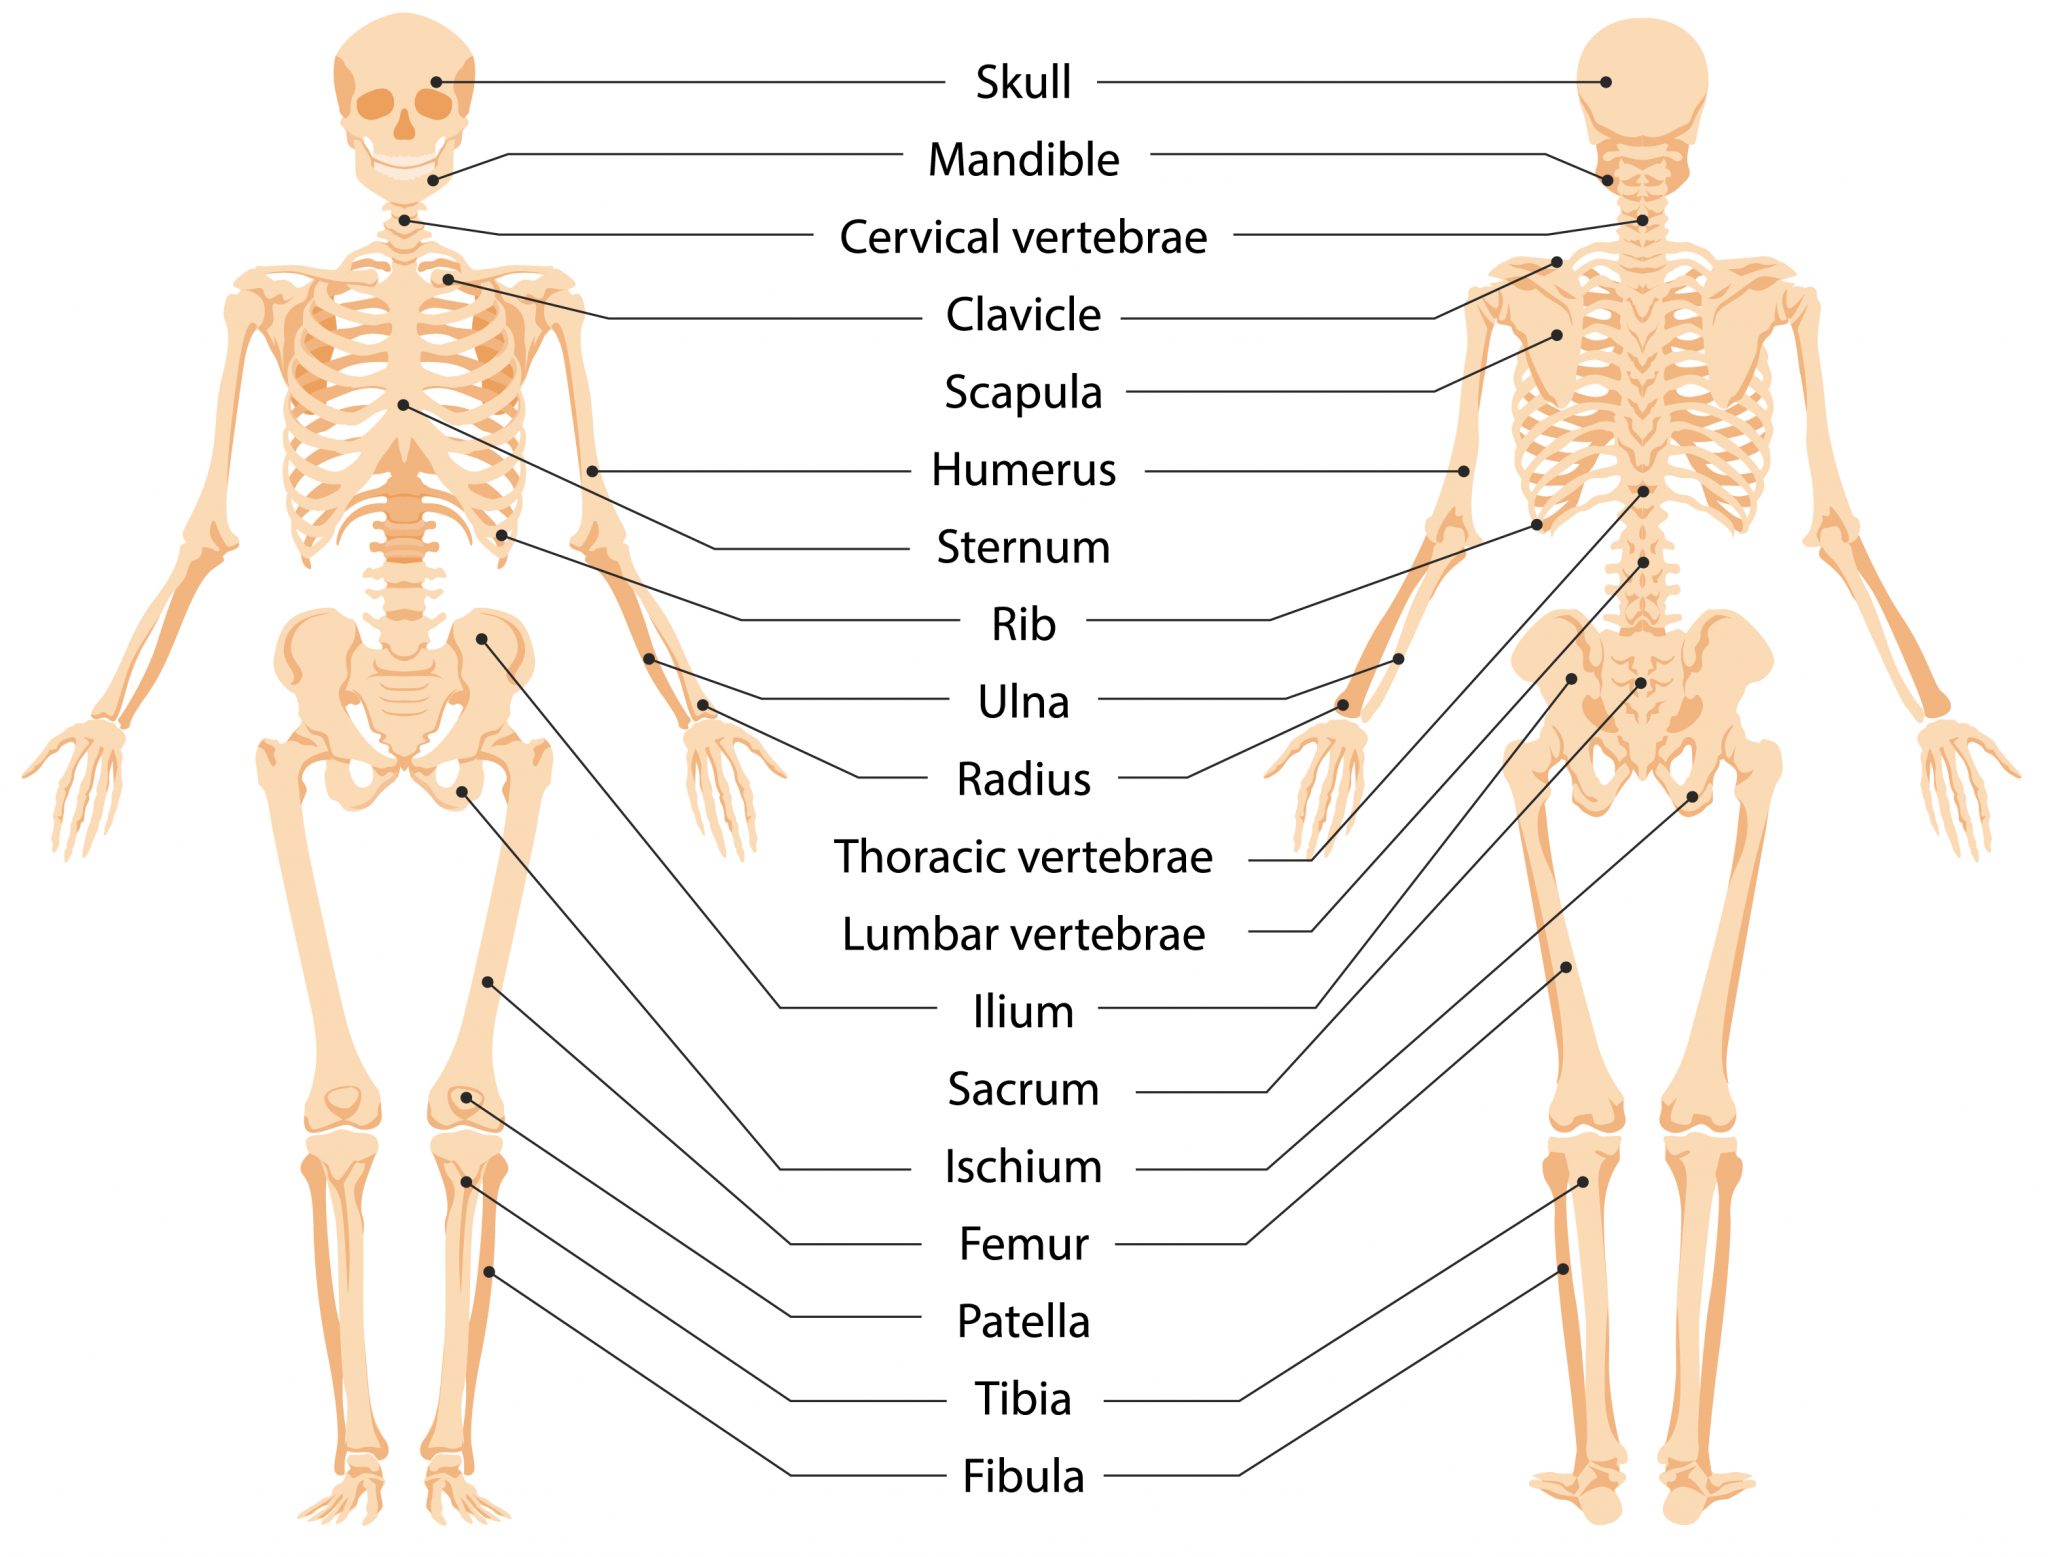 human-anatomical-skeleton-infographic-front-view-and-back-view-vector